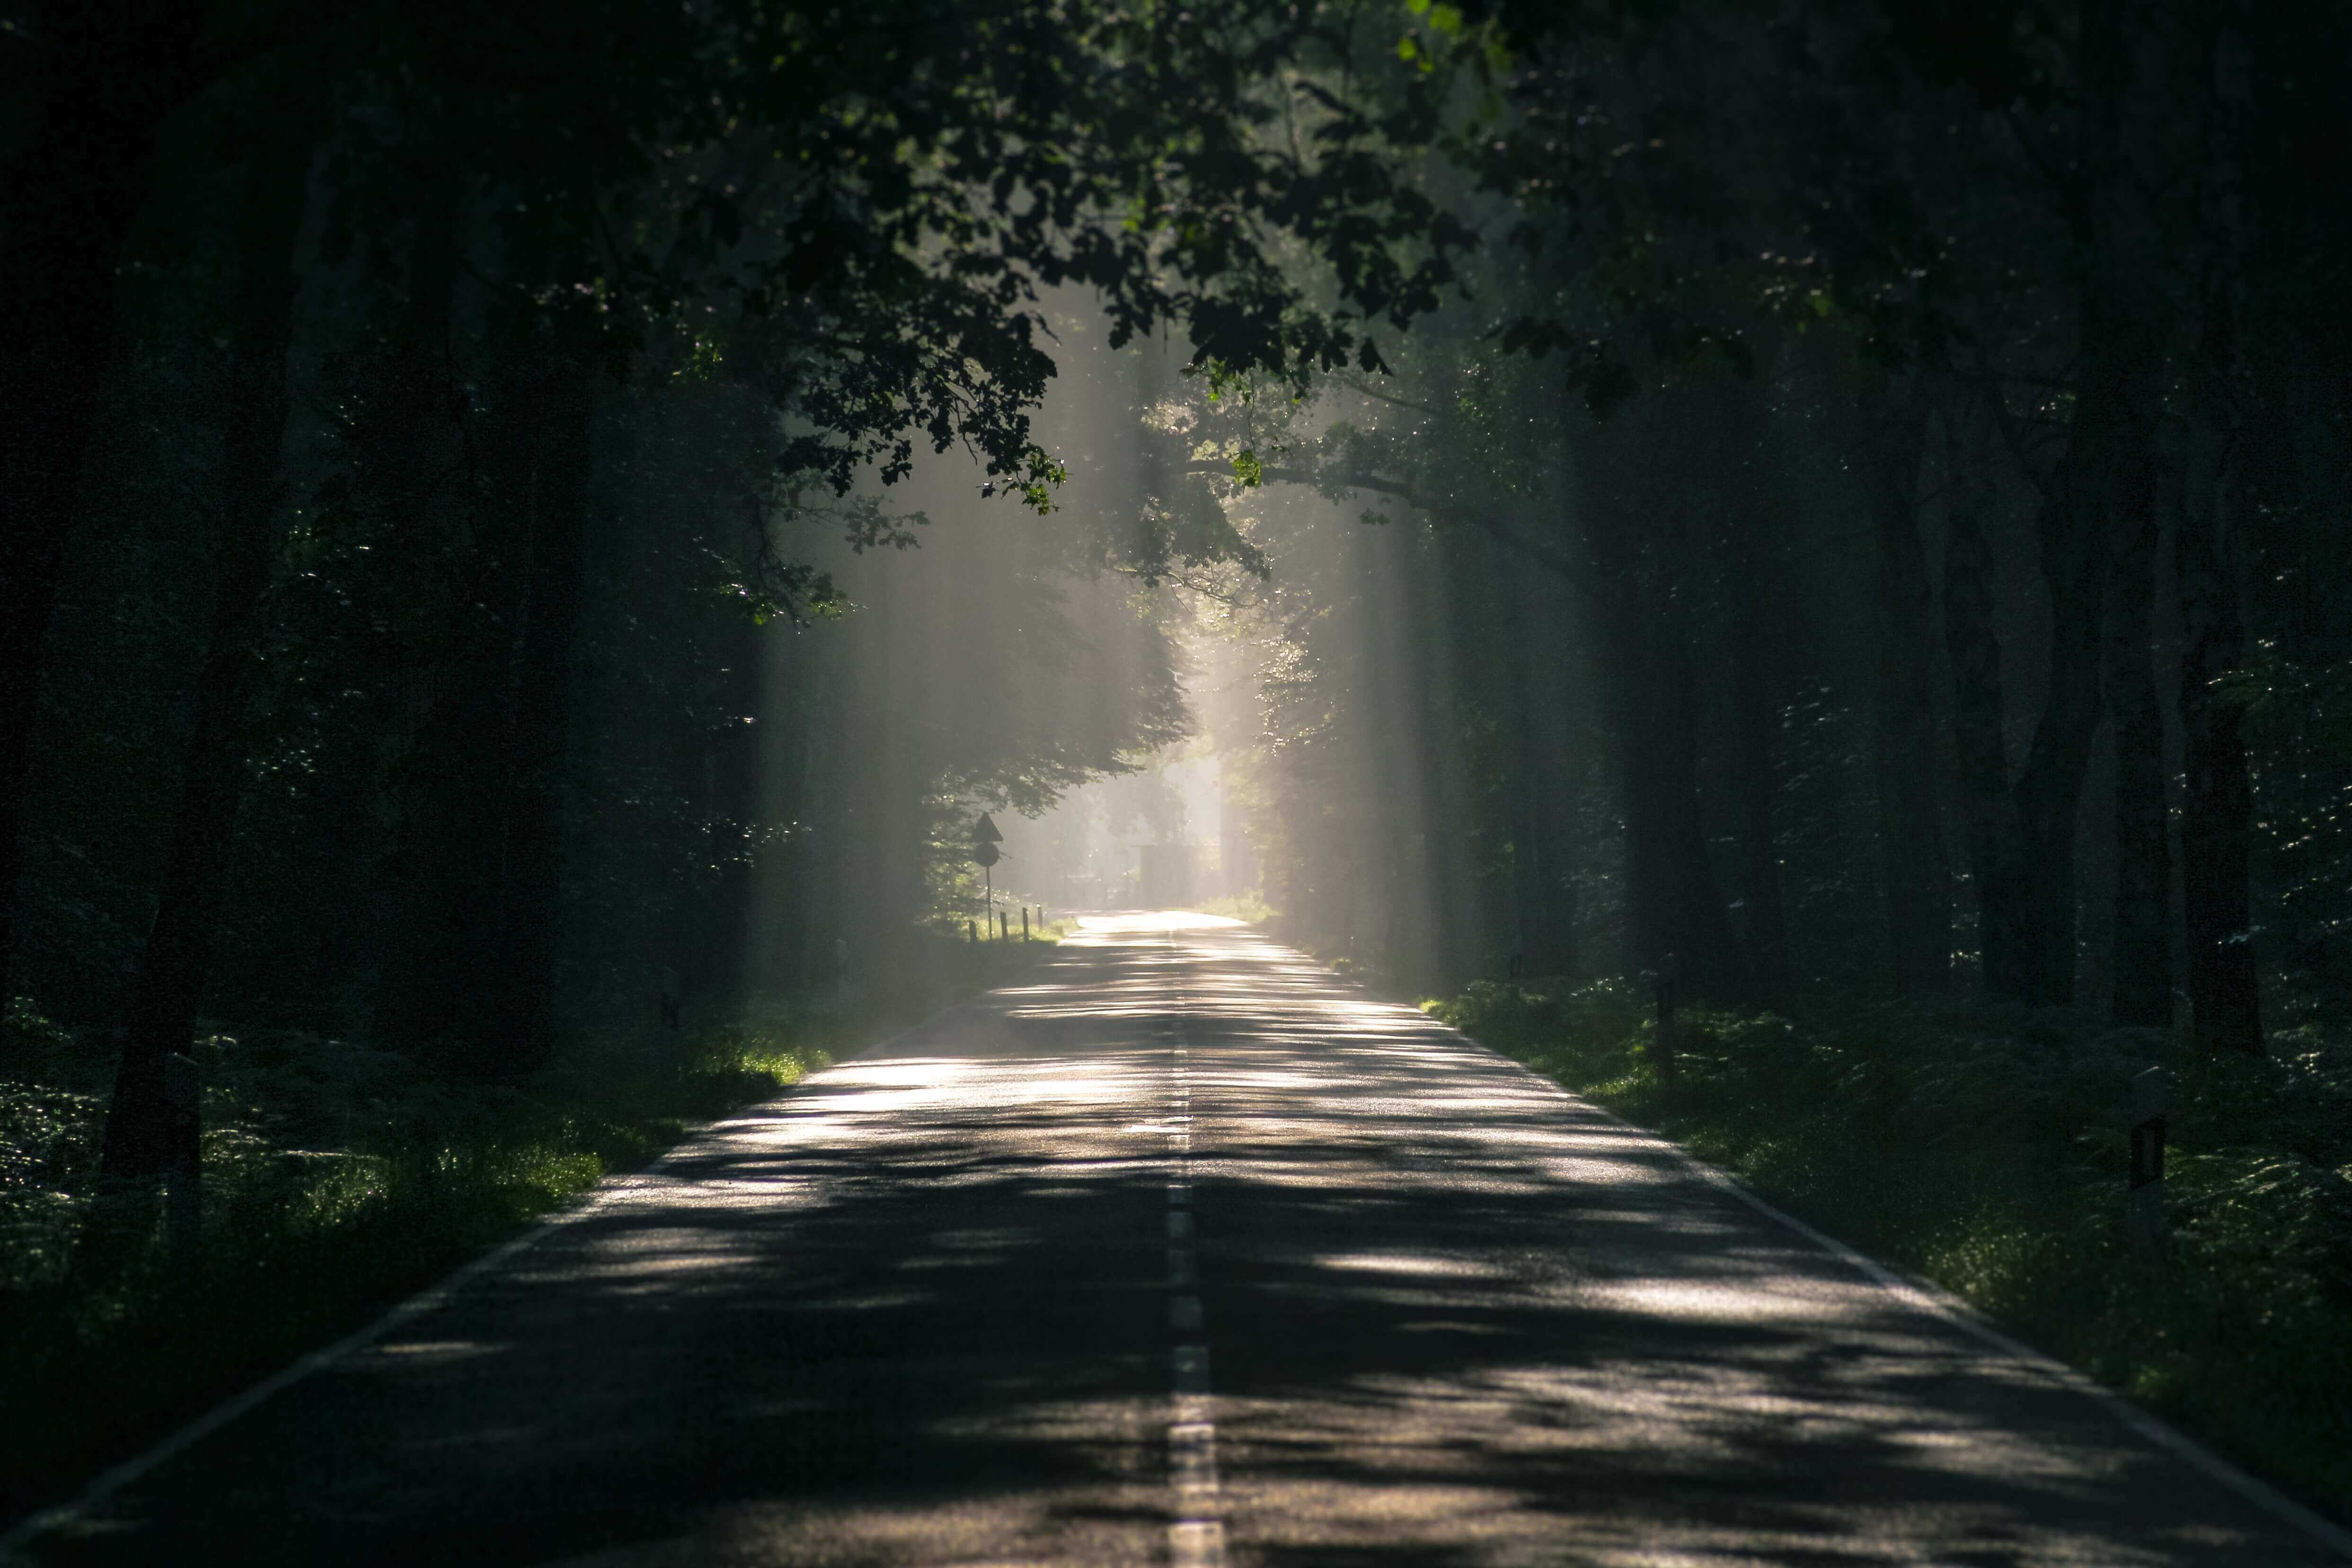 A photograph of a misty road with a shadowed trees overhead